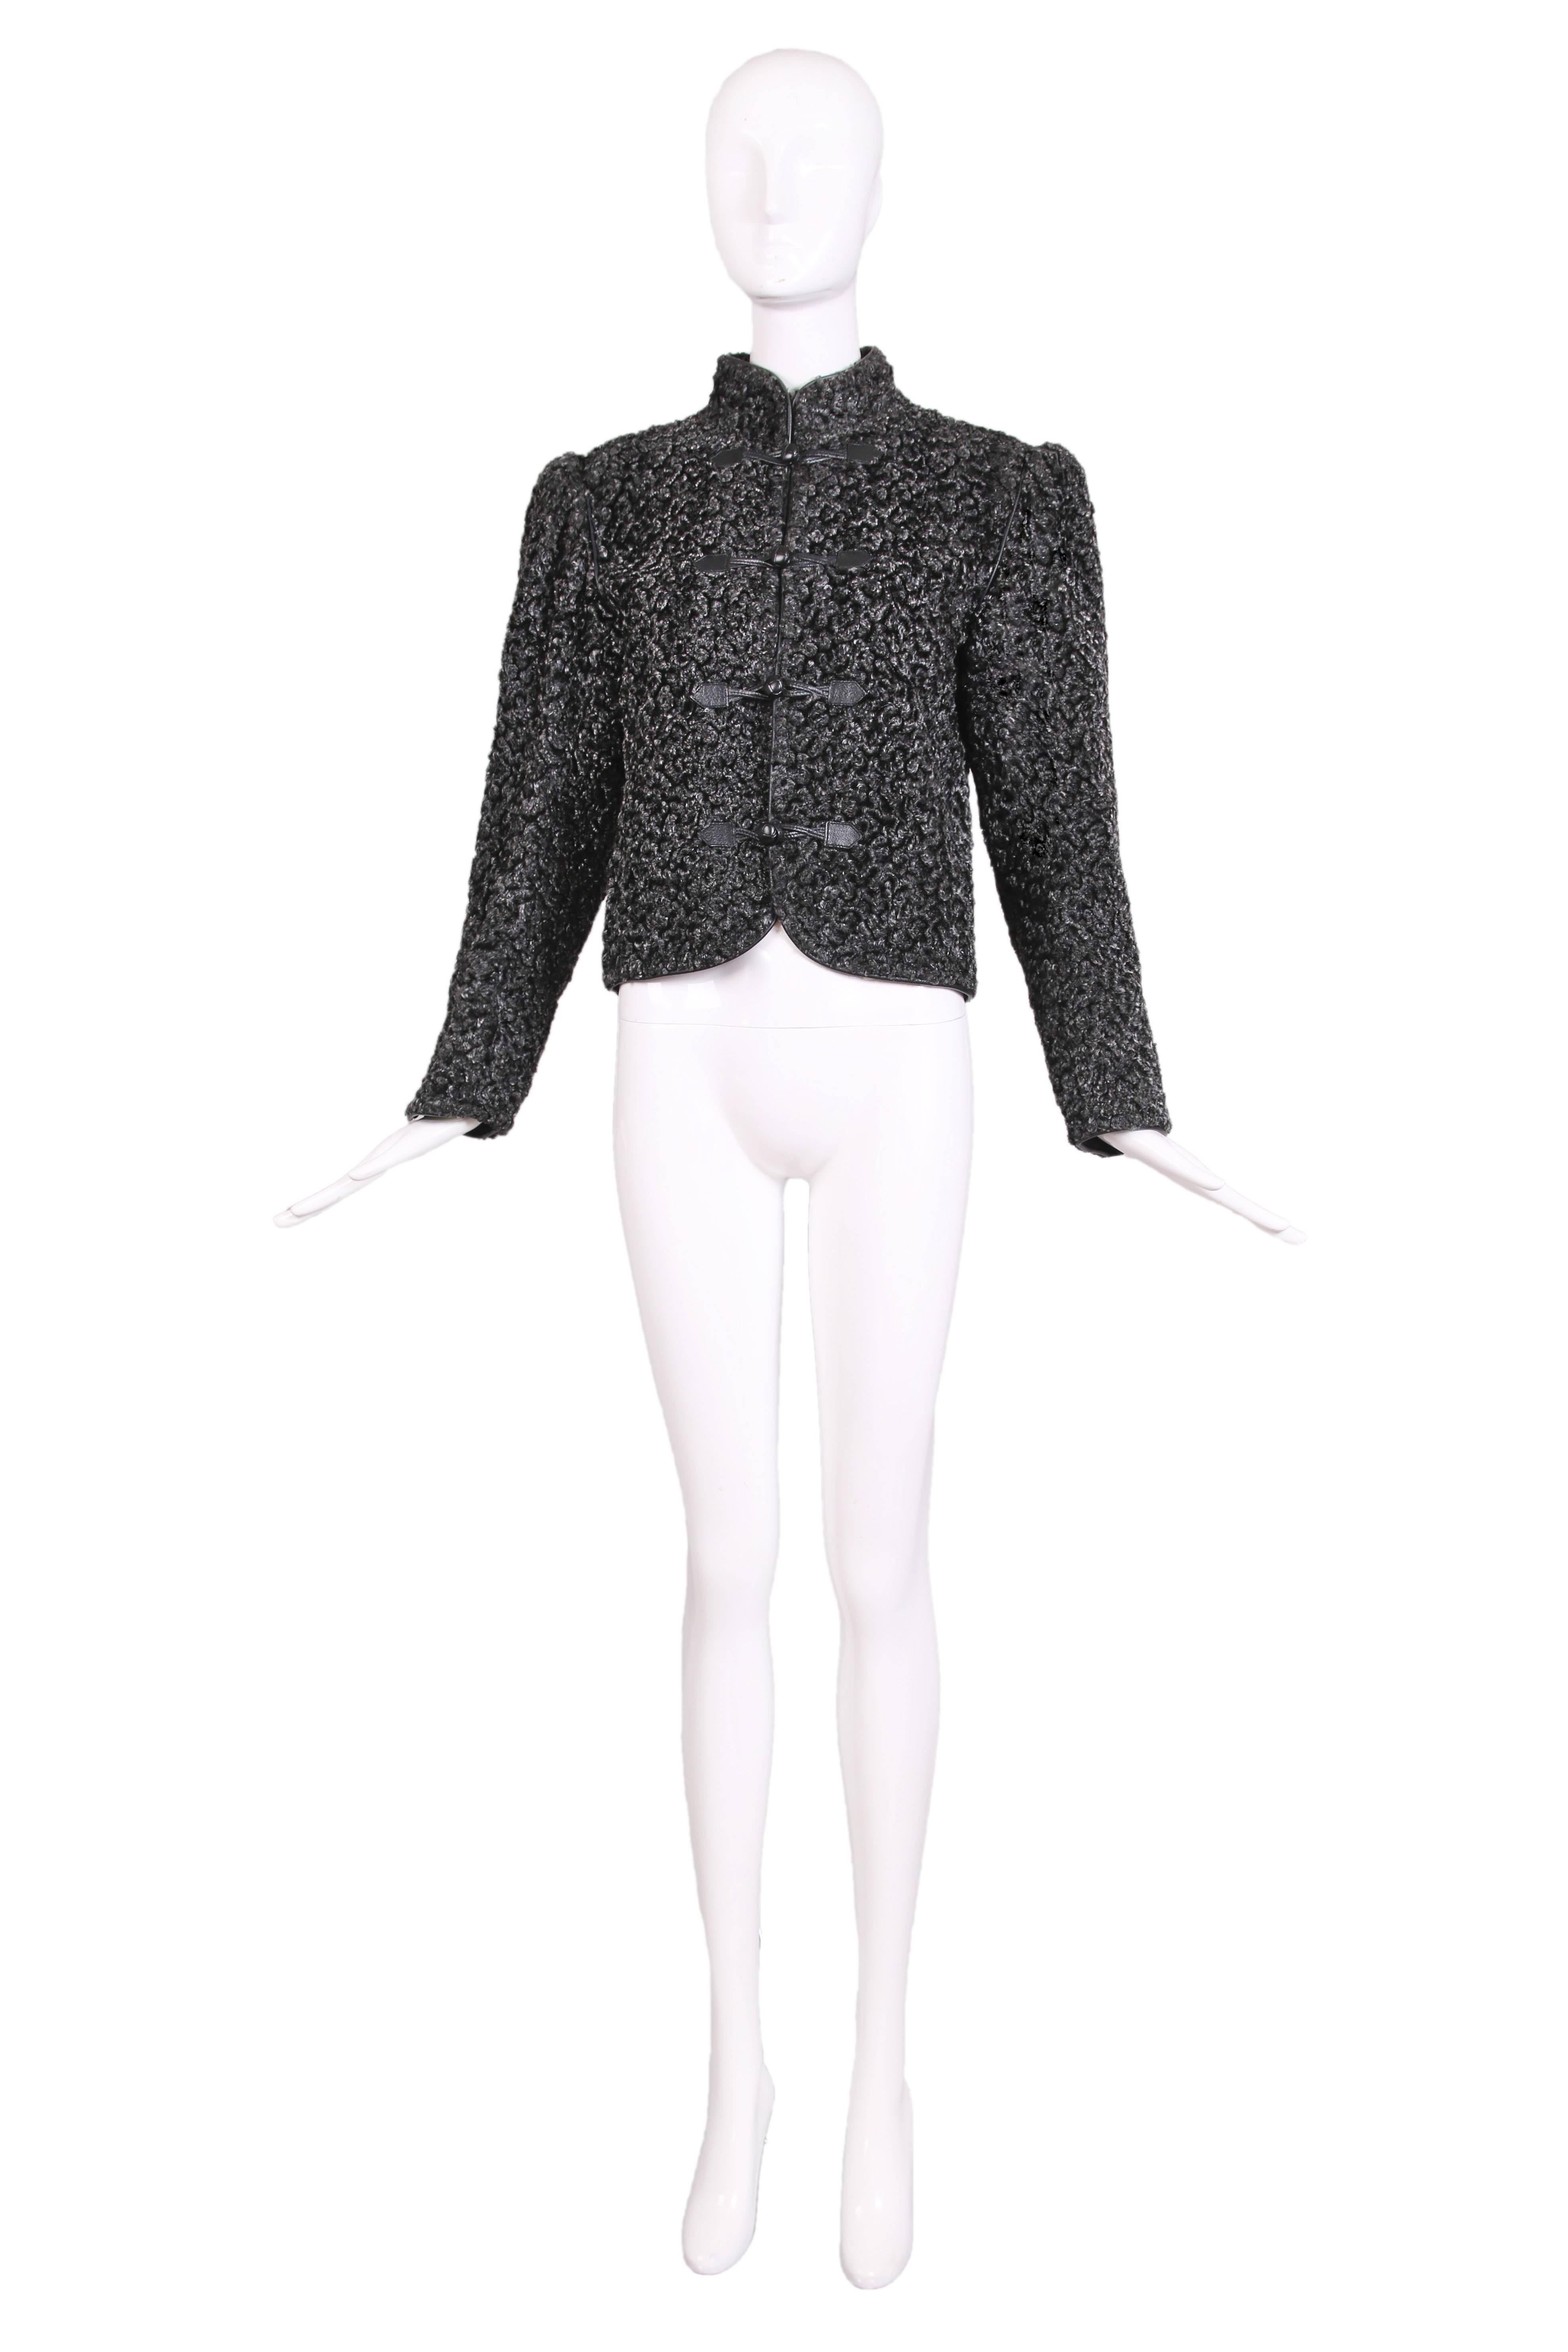 Yves Saint Laurent uncut broadtail fur jacket in the classic Russian style. This jacket has four leather loop and button closures and us trimmed in leather pipping. c.1970's 
Measurements -
Bust: 40"
Waist: 36"
Length: 20"
EU: 36
